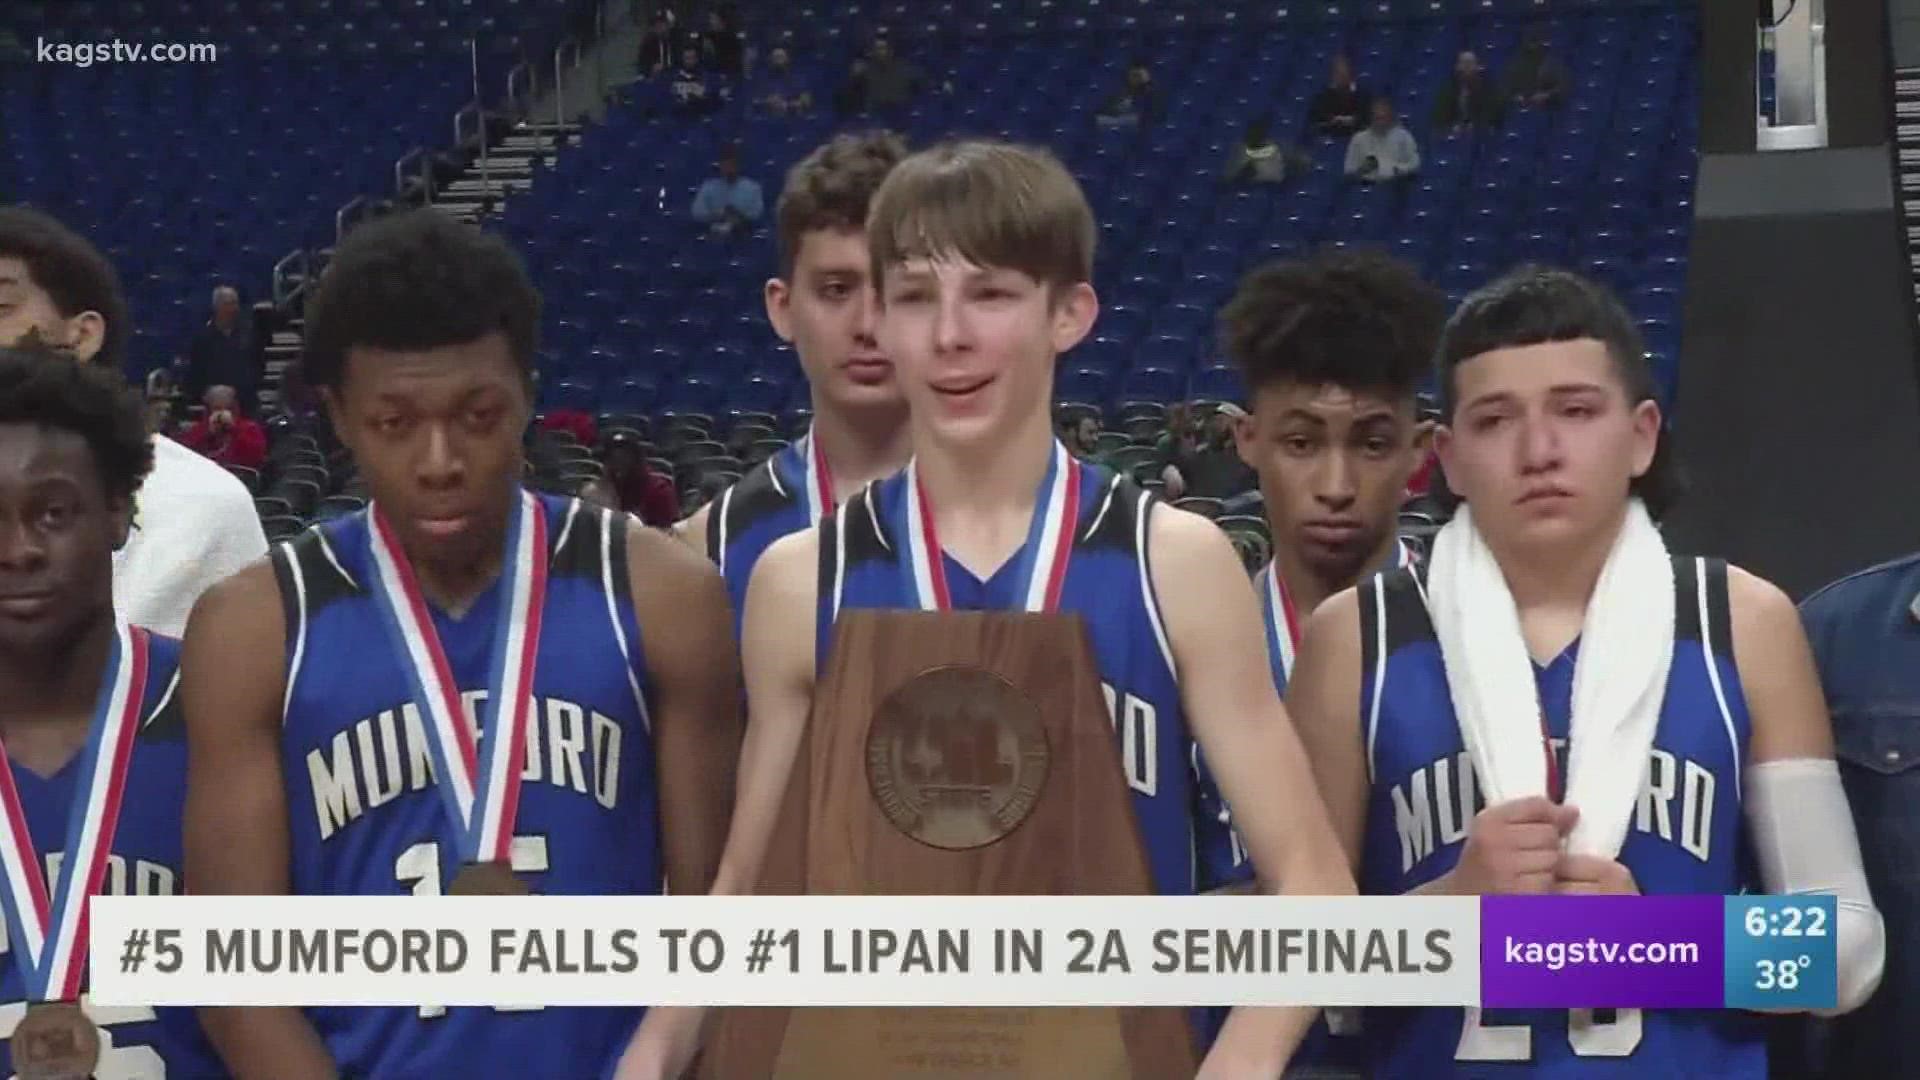 Lipan defeated Mumford, 58-40, to advance to the State Championship. Congratulations to the Mustangs for a great season!